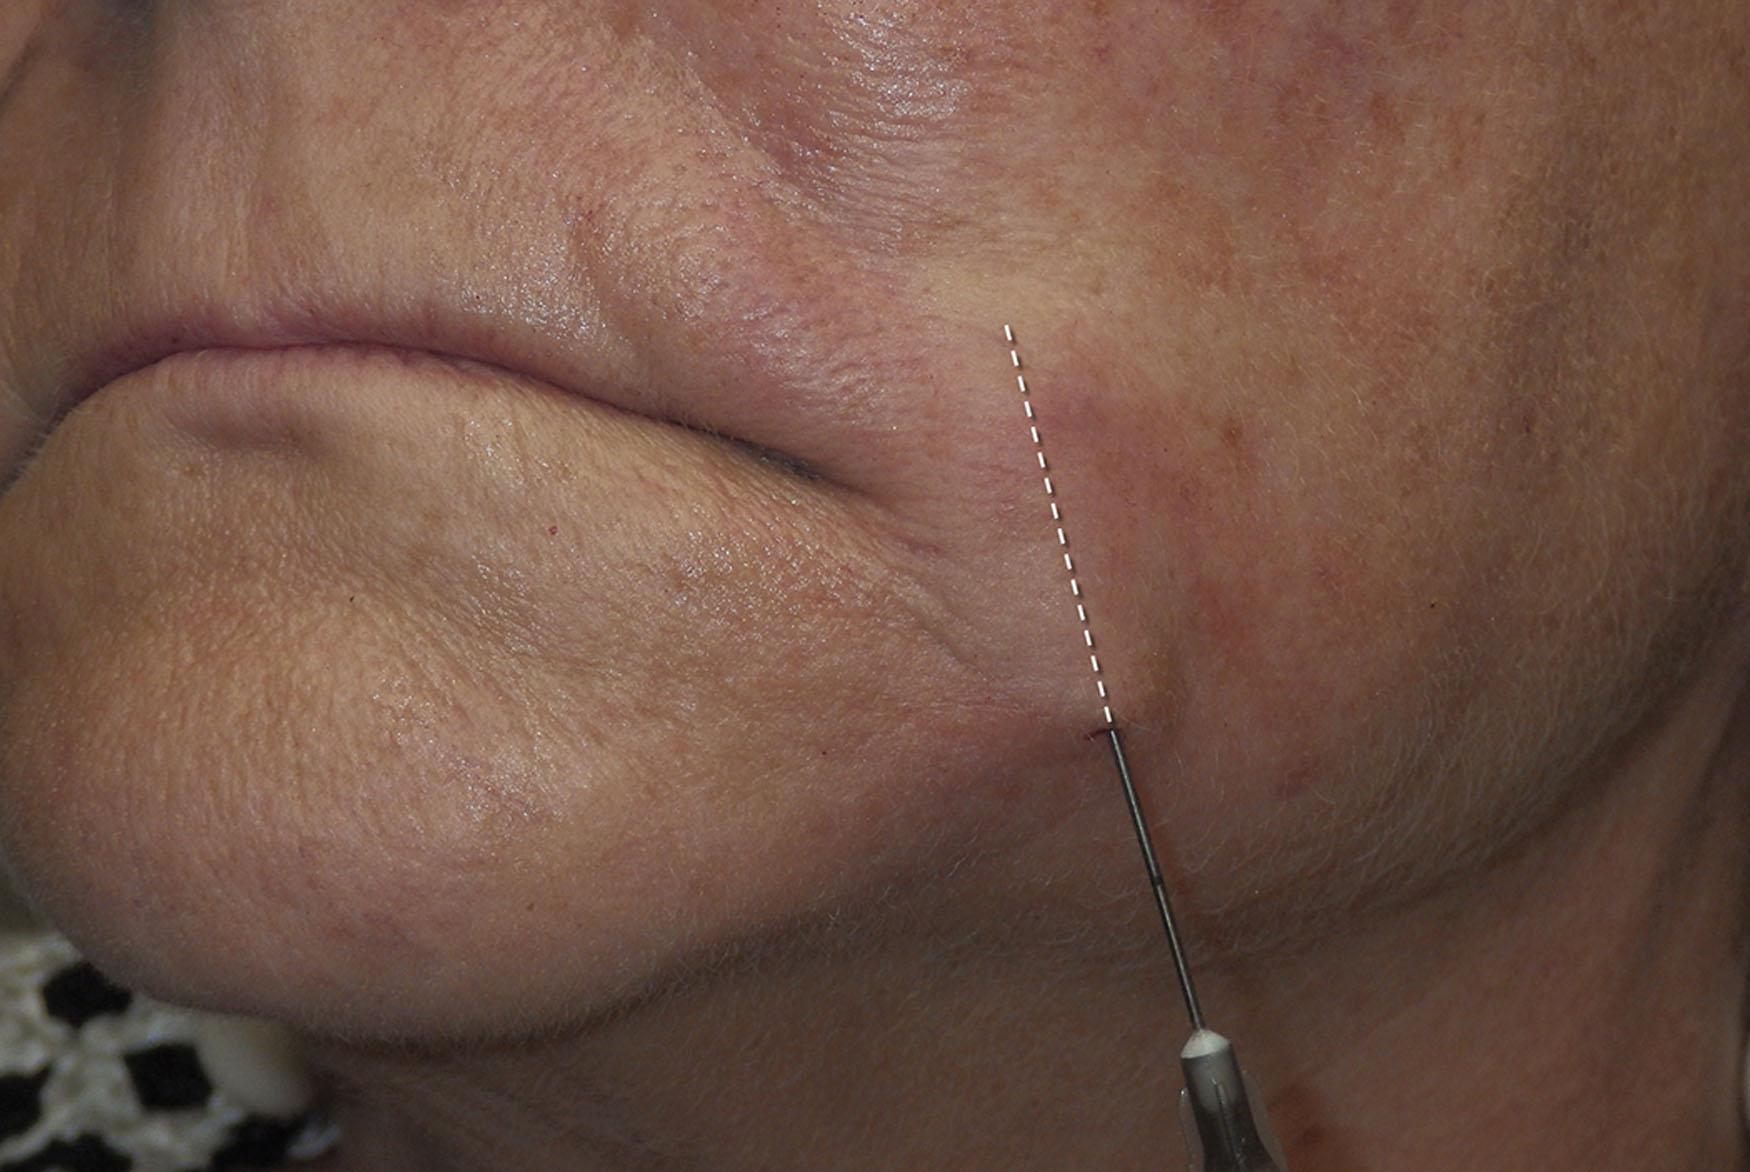 Fig. 10.49, A blunt cannula or a cannula and filler needle can be used to treat the perioral region.